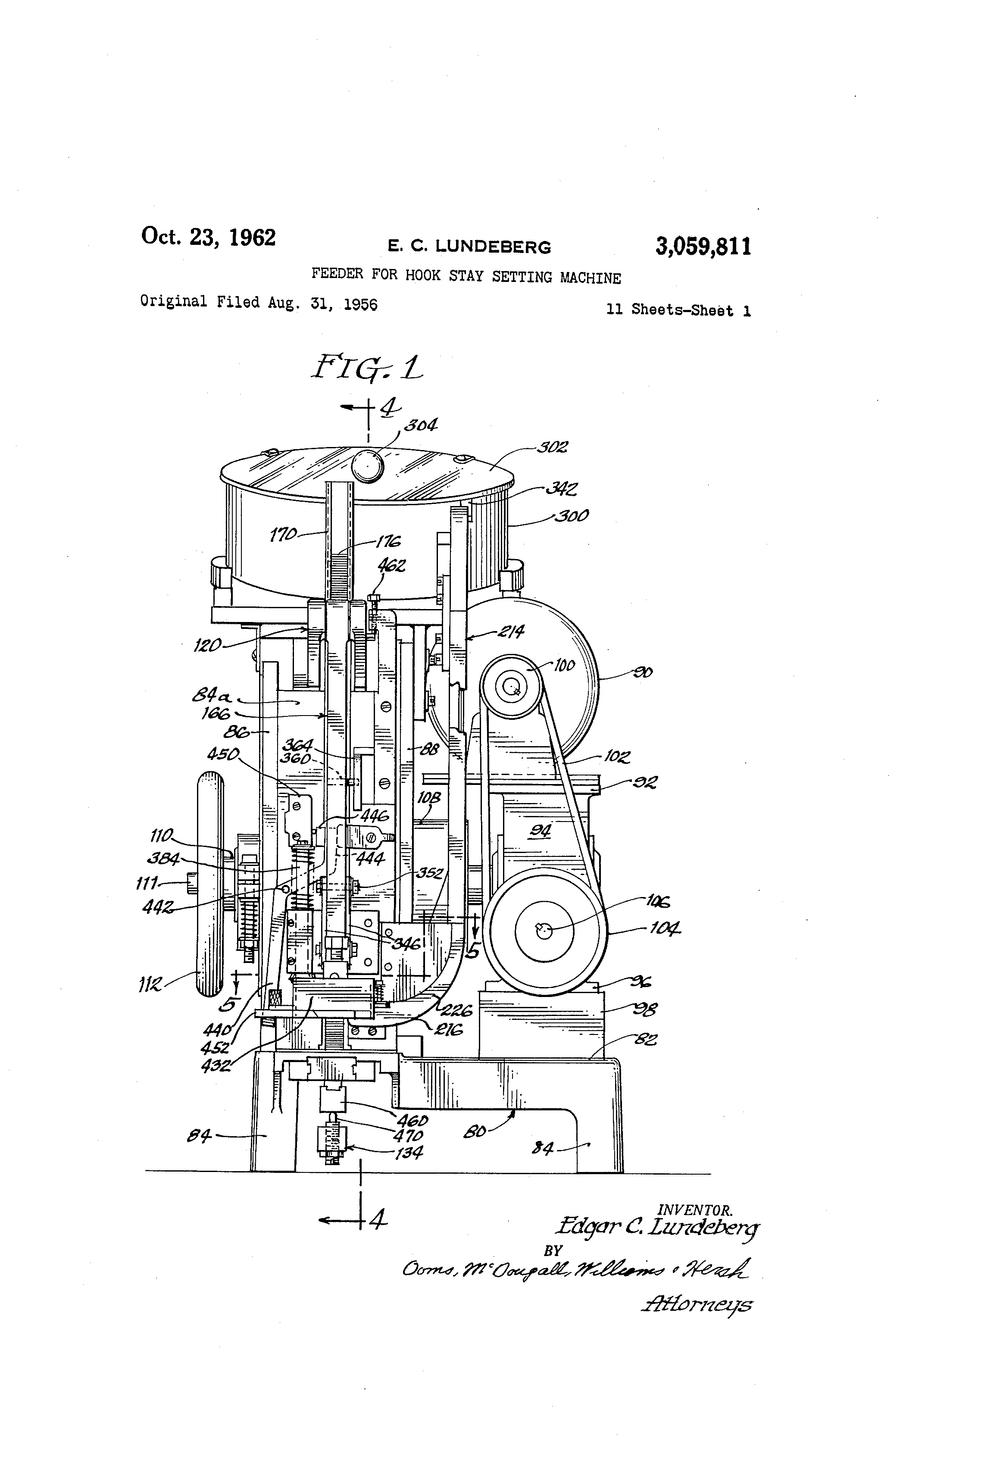 E.C. Lundeberg, Feeder for Hook Stay Setting Machine, 1962, US3059811